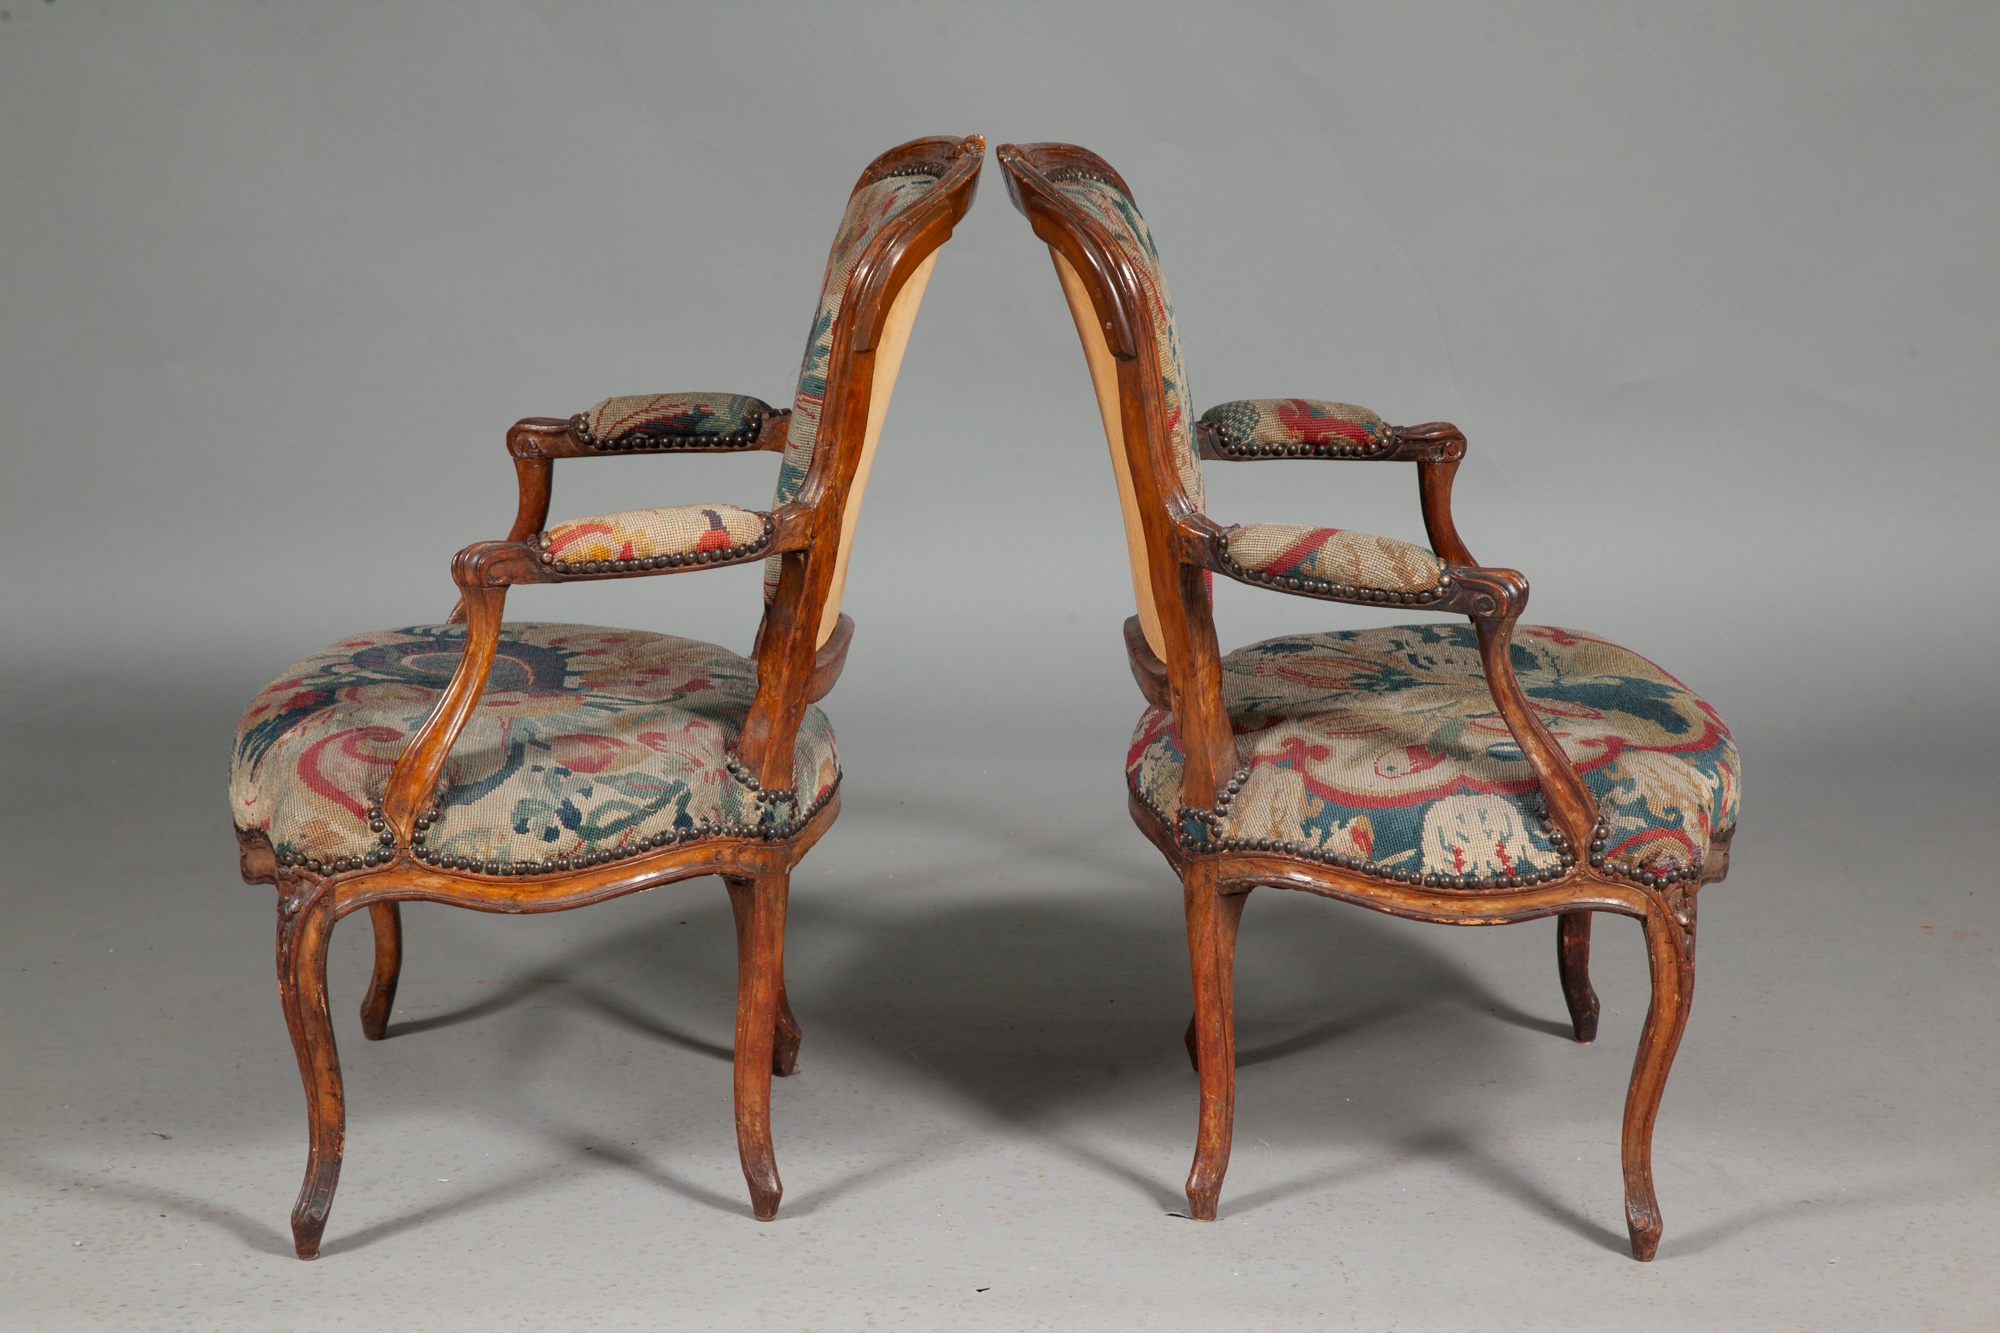 Assembled Group of Louis XV Needlework-Upholstered Beechwood Fauteuils - Image 7 of 8